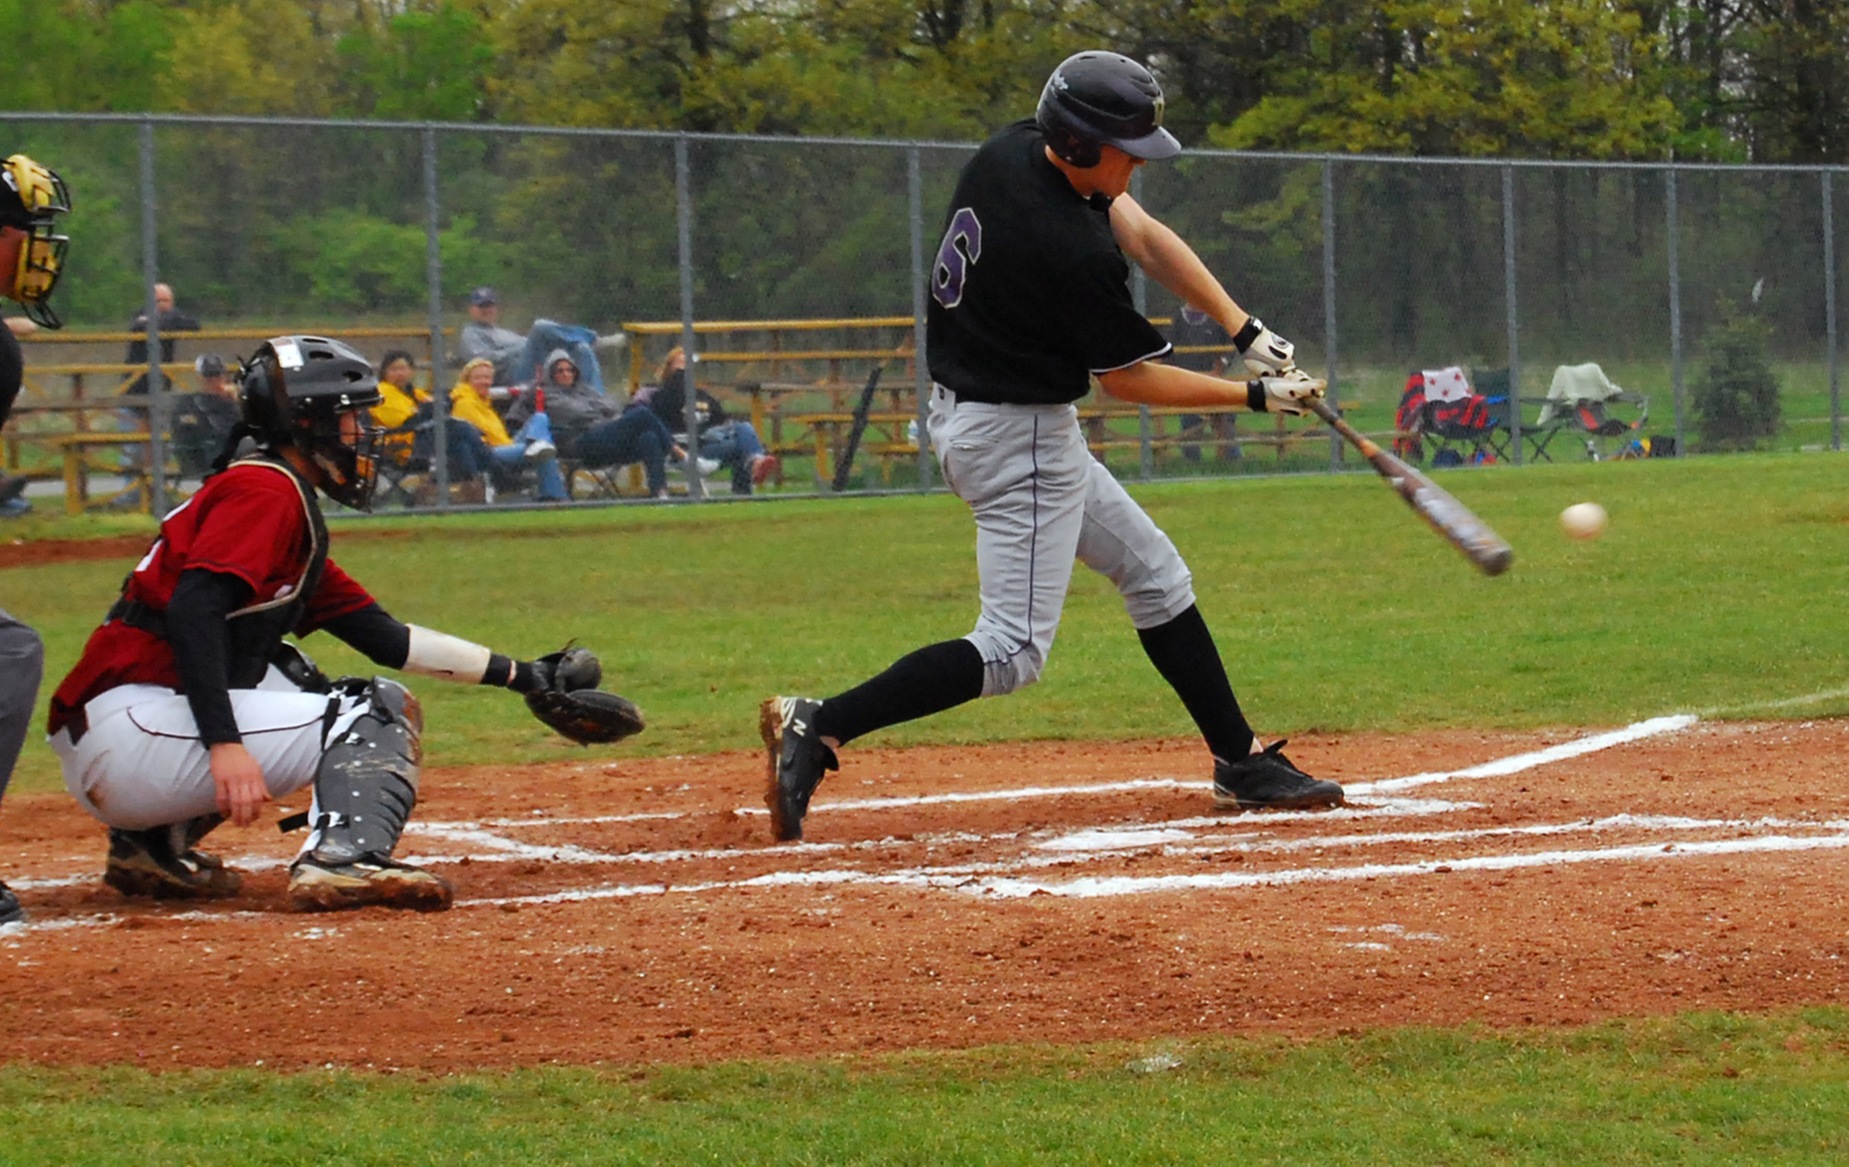 DC’s Jesse Earns HCAC Player-of-the-Week Honors